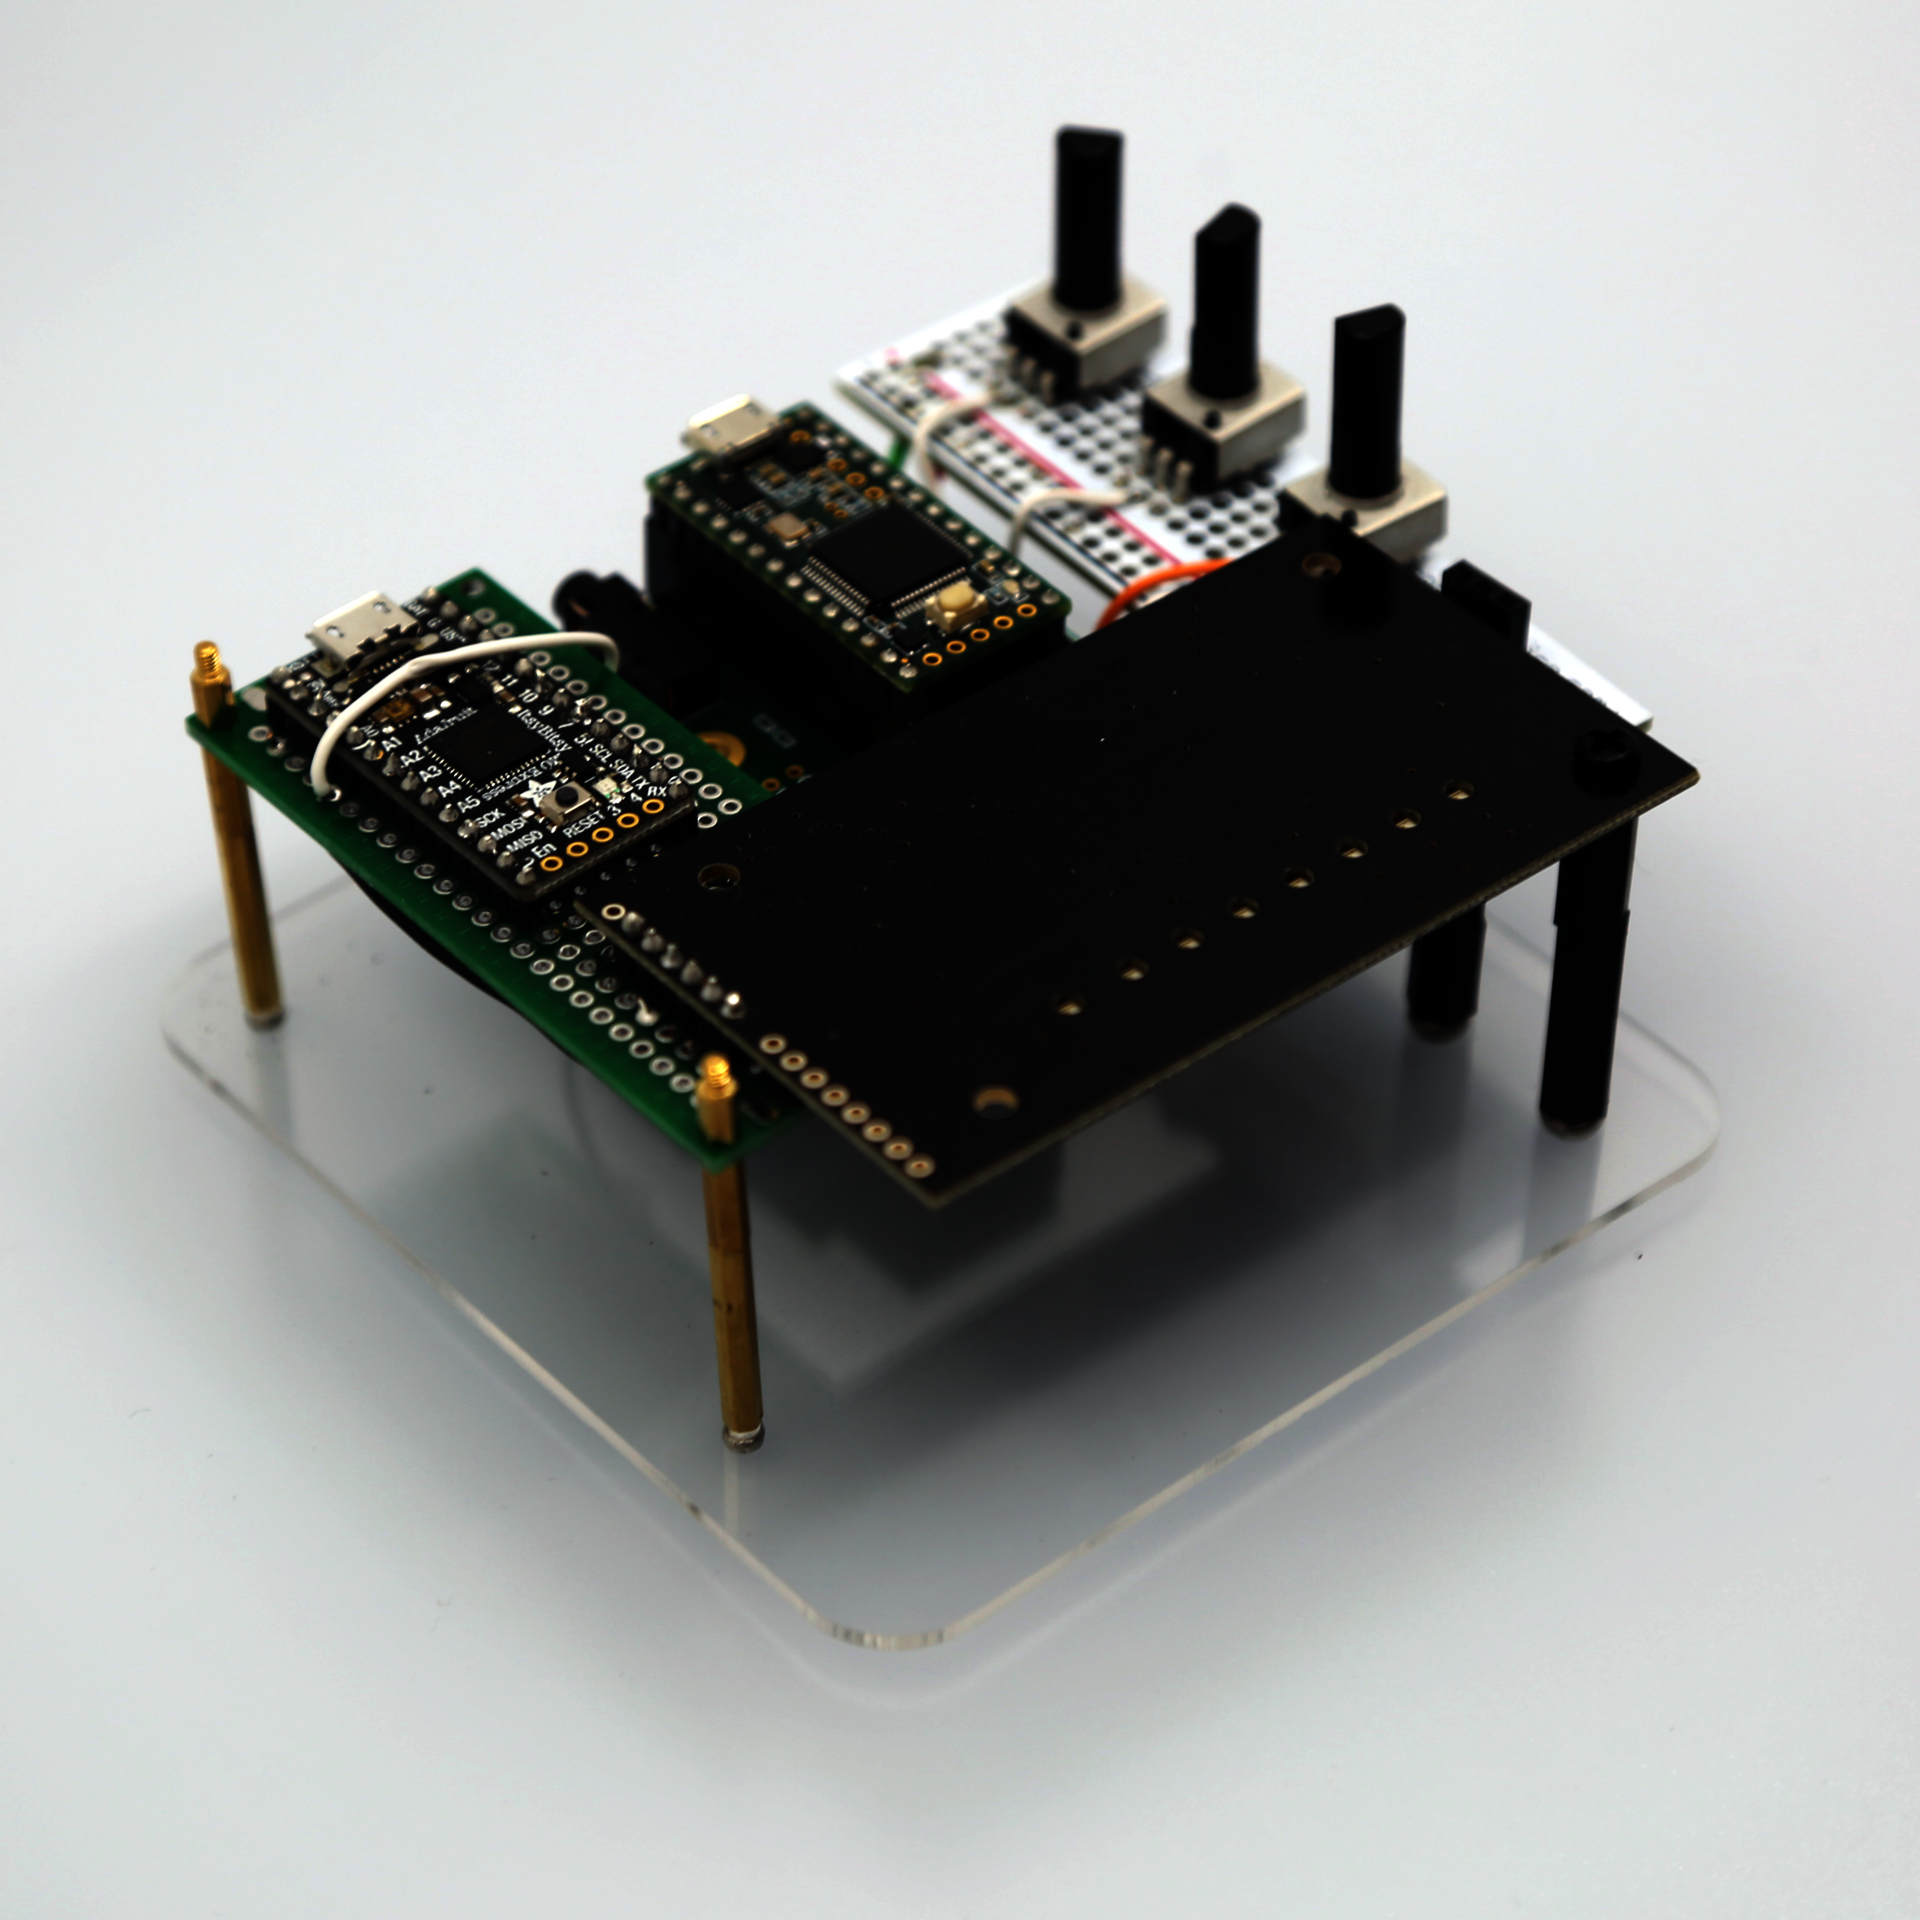 Image of an instrument consisting of circuit boards and small electronics components wired together.